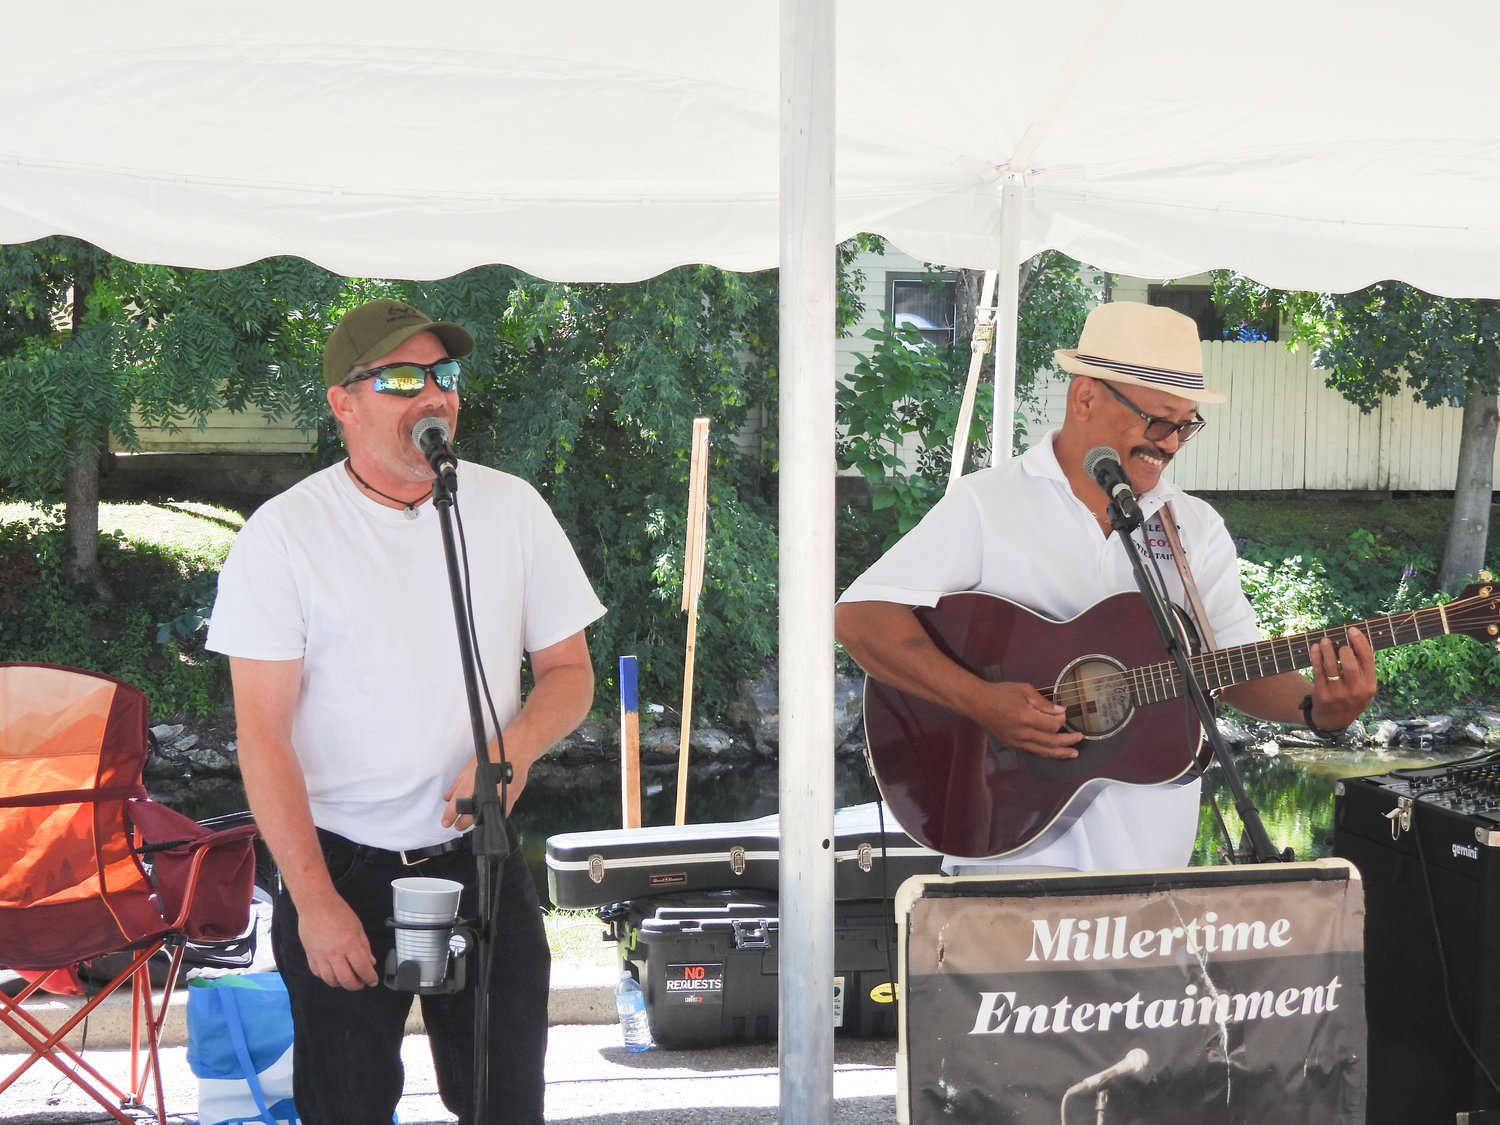 Residents came out for a day of fun and a taste of Italy at the Canastota Italian Heritage Festival on Saturday, Aug. 13. Milltertime Entertainment played for those in attendance.